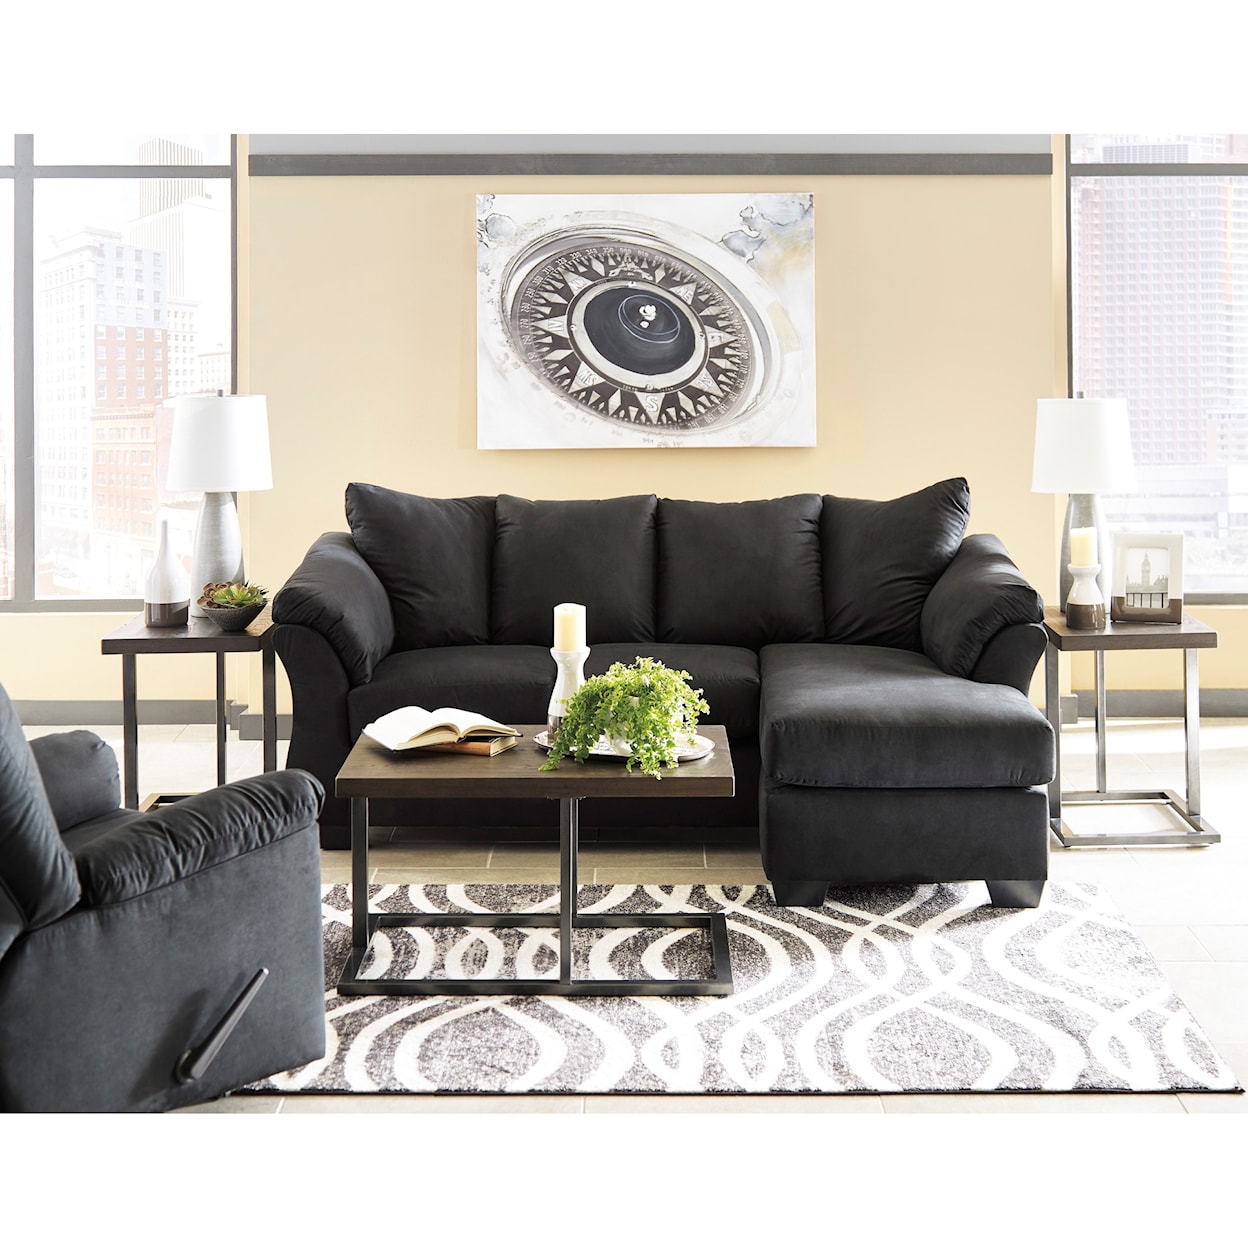 Signature Design by Ashley Furniture Darcy Stationary Living Room Group